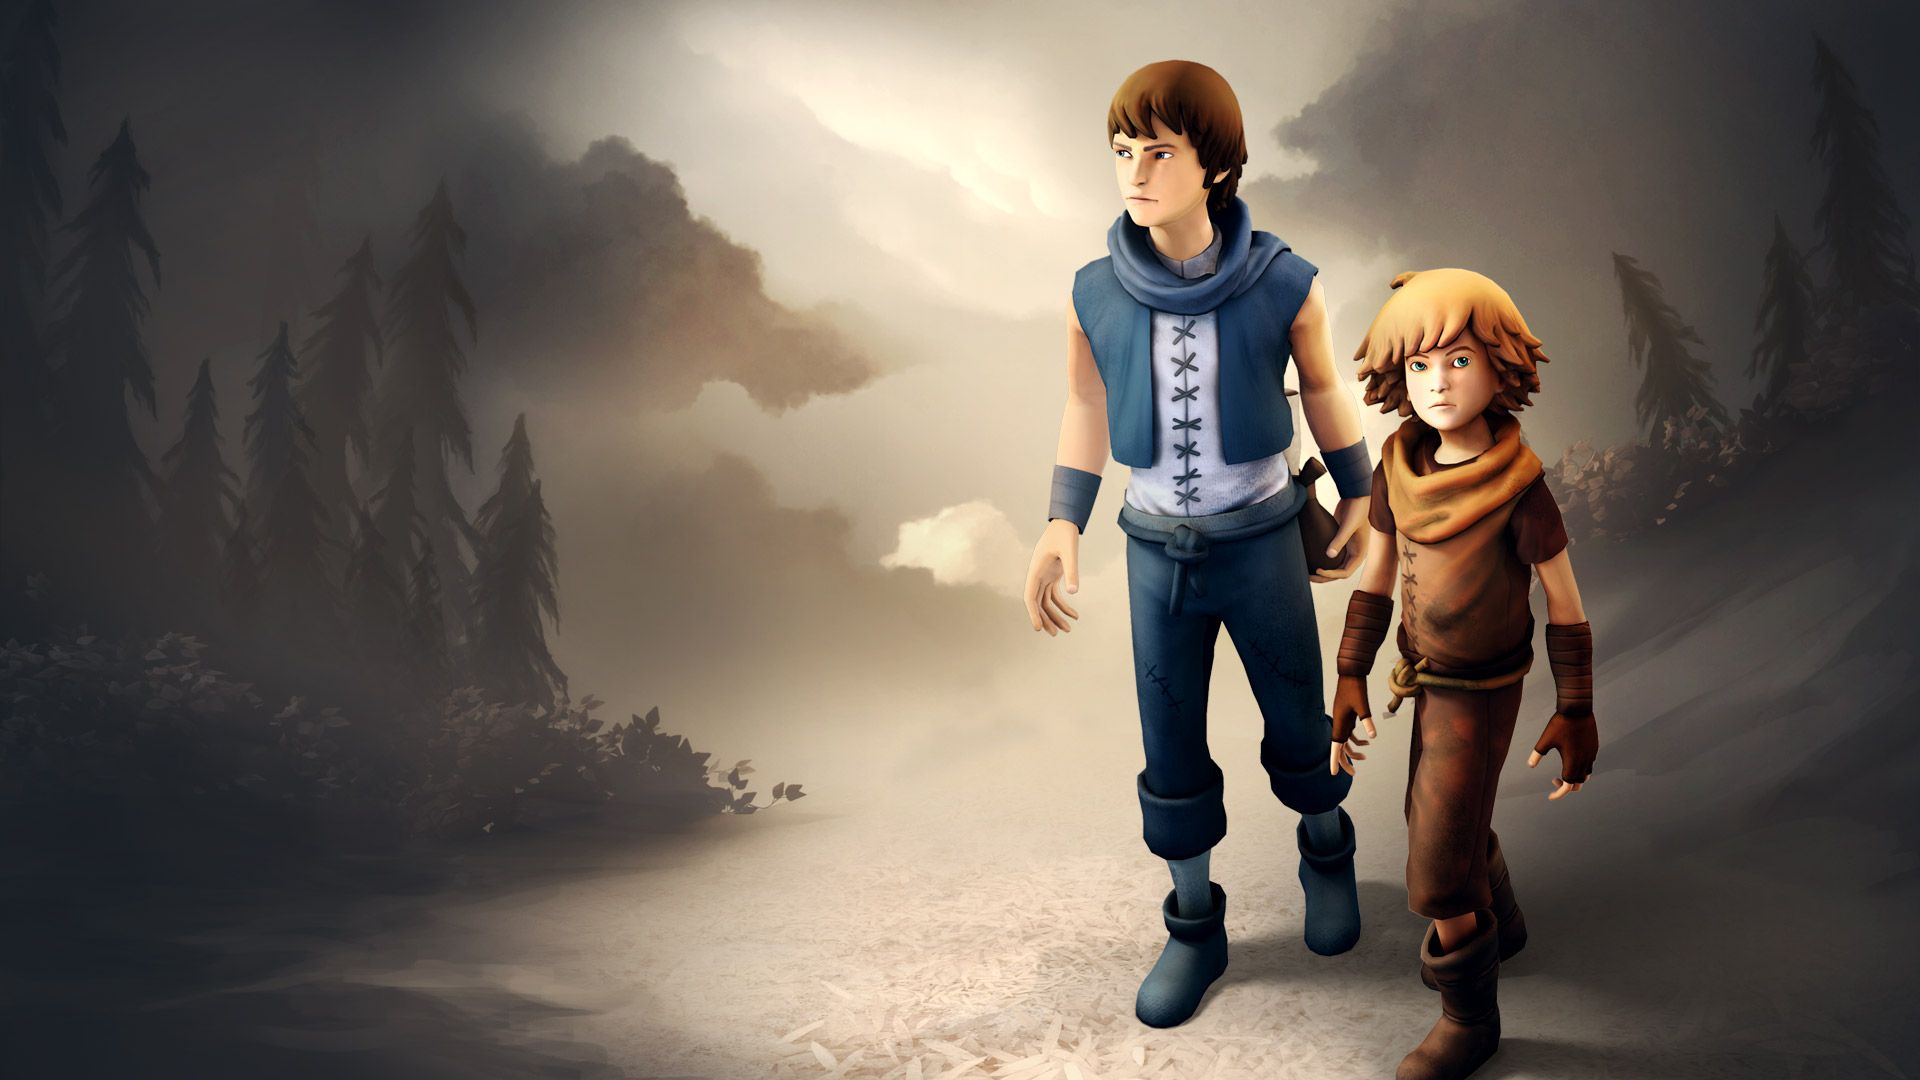 Brothers: A Tale of Two Sons Wallpaper in 1920x1080